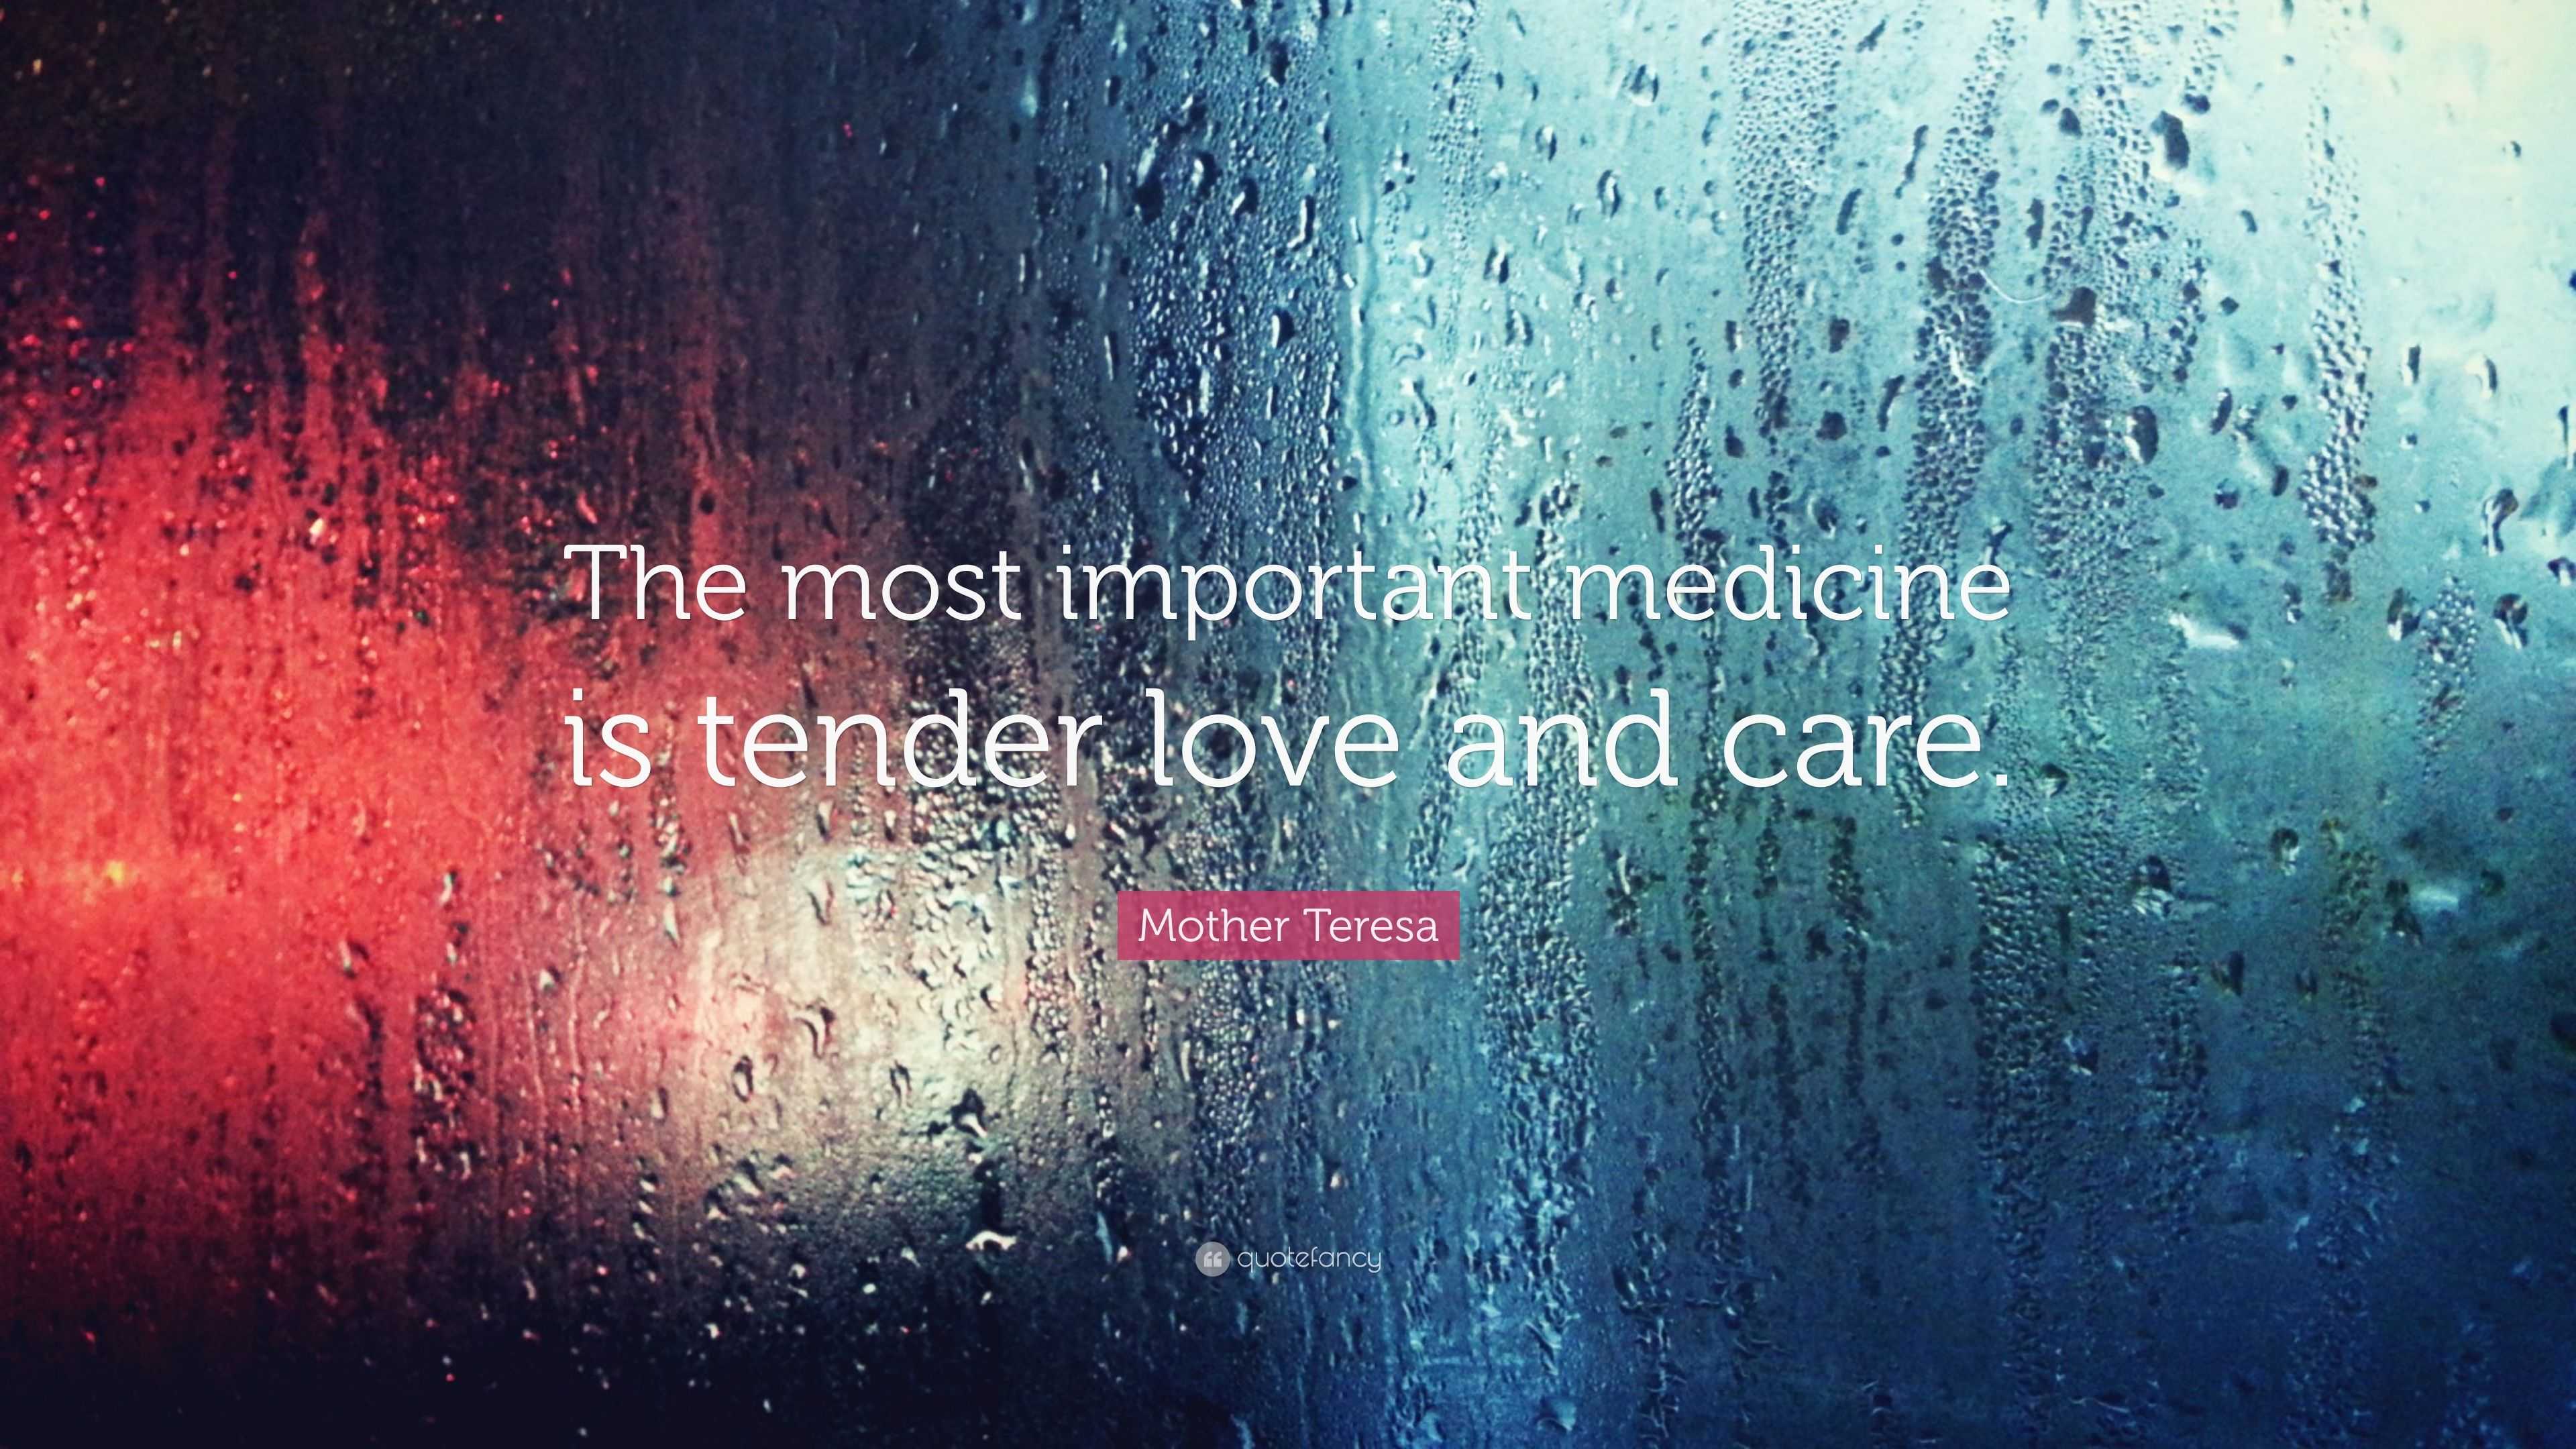 love and care medicine quotes